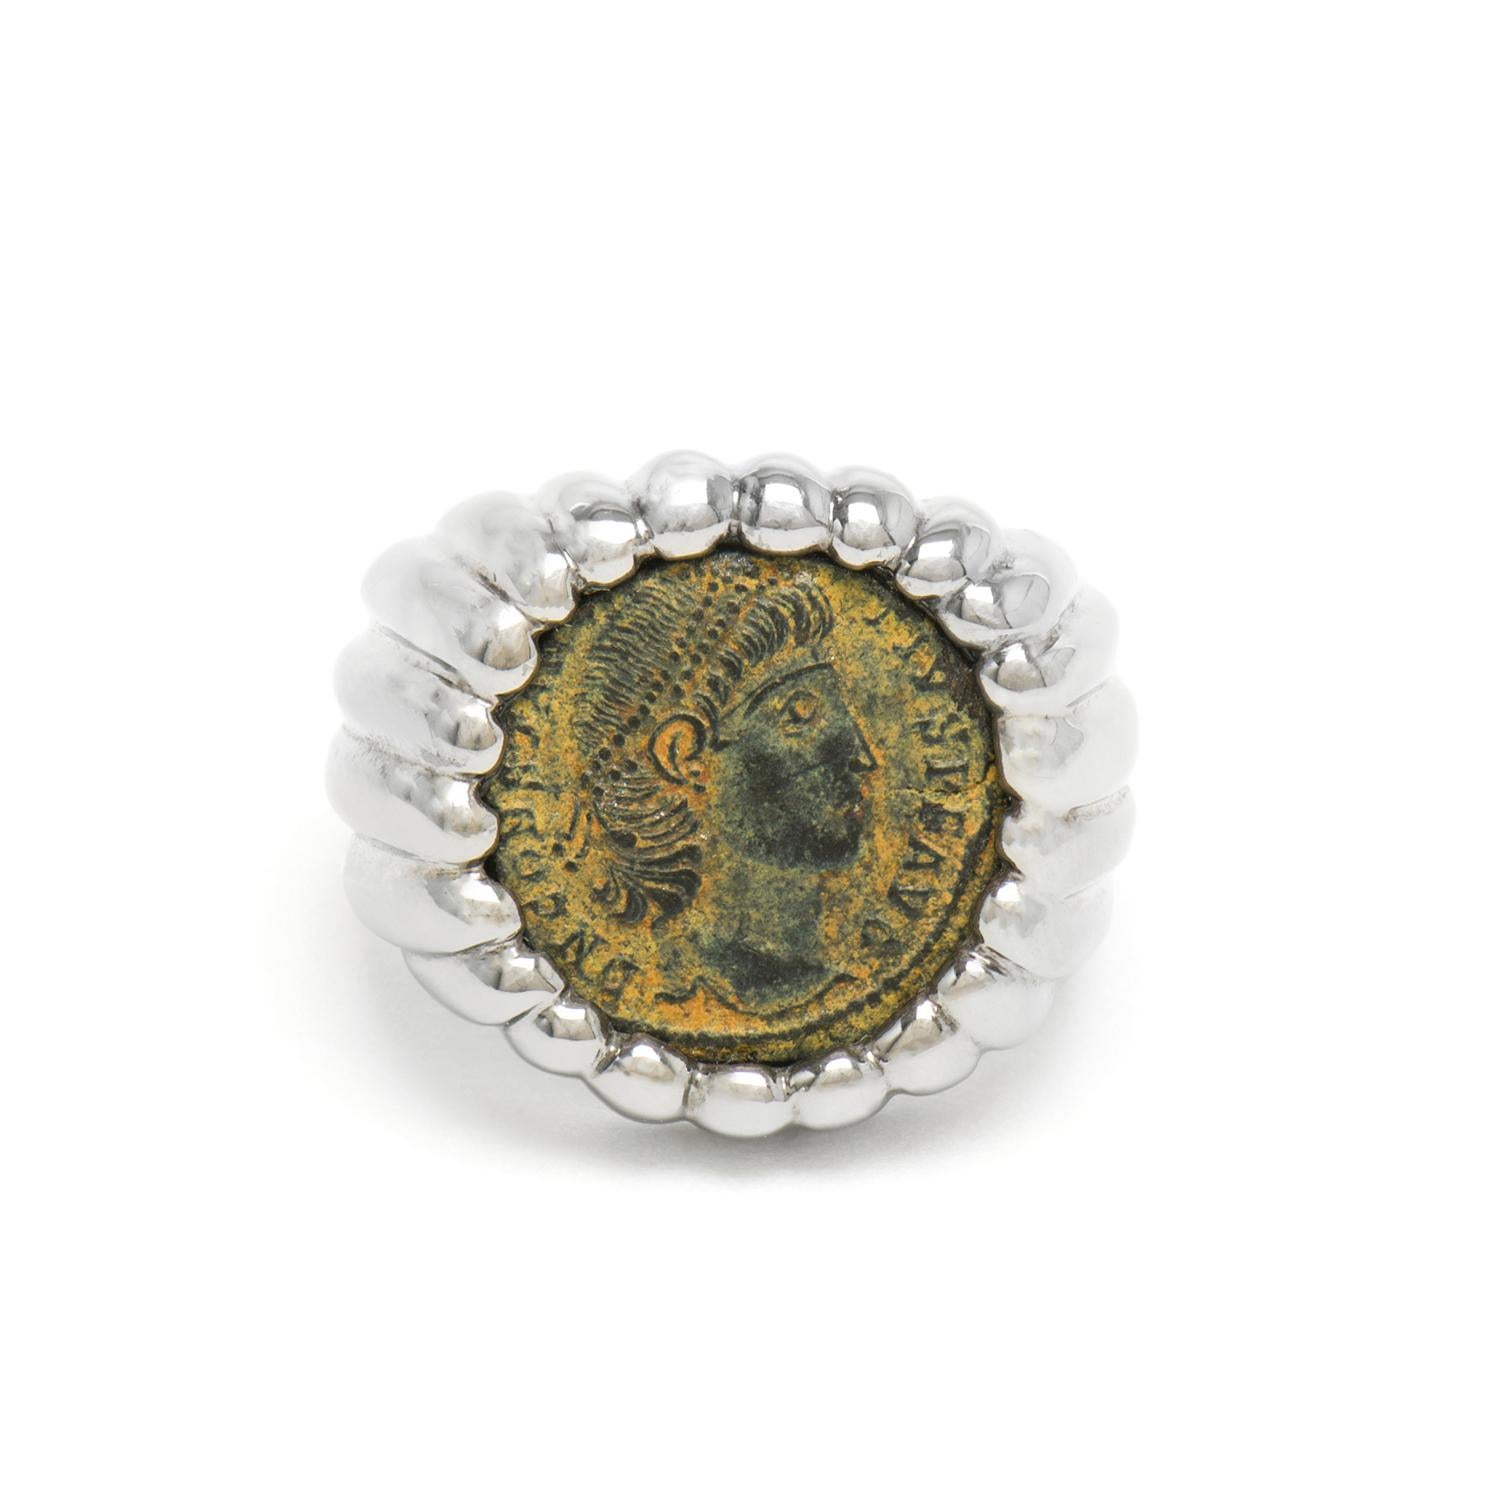 This DUBINI coin ring from the 'Empires' collection features an authentic Roman Imperial bronze coin depicting Constantine the Great set in black rhodium sterling silver.

The ring may be ordered in any size with a lead time of 3-4 weeks.

* Due to